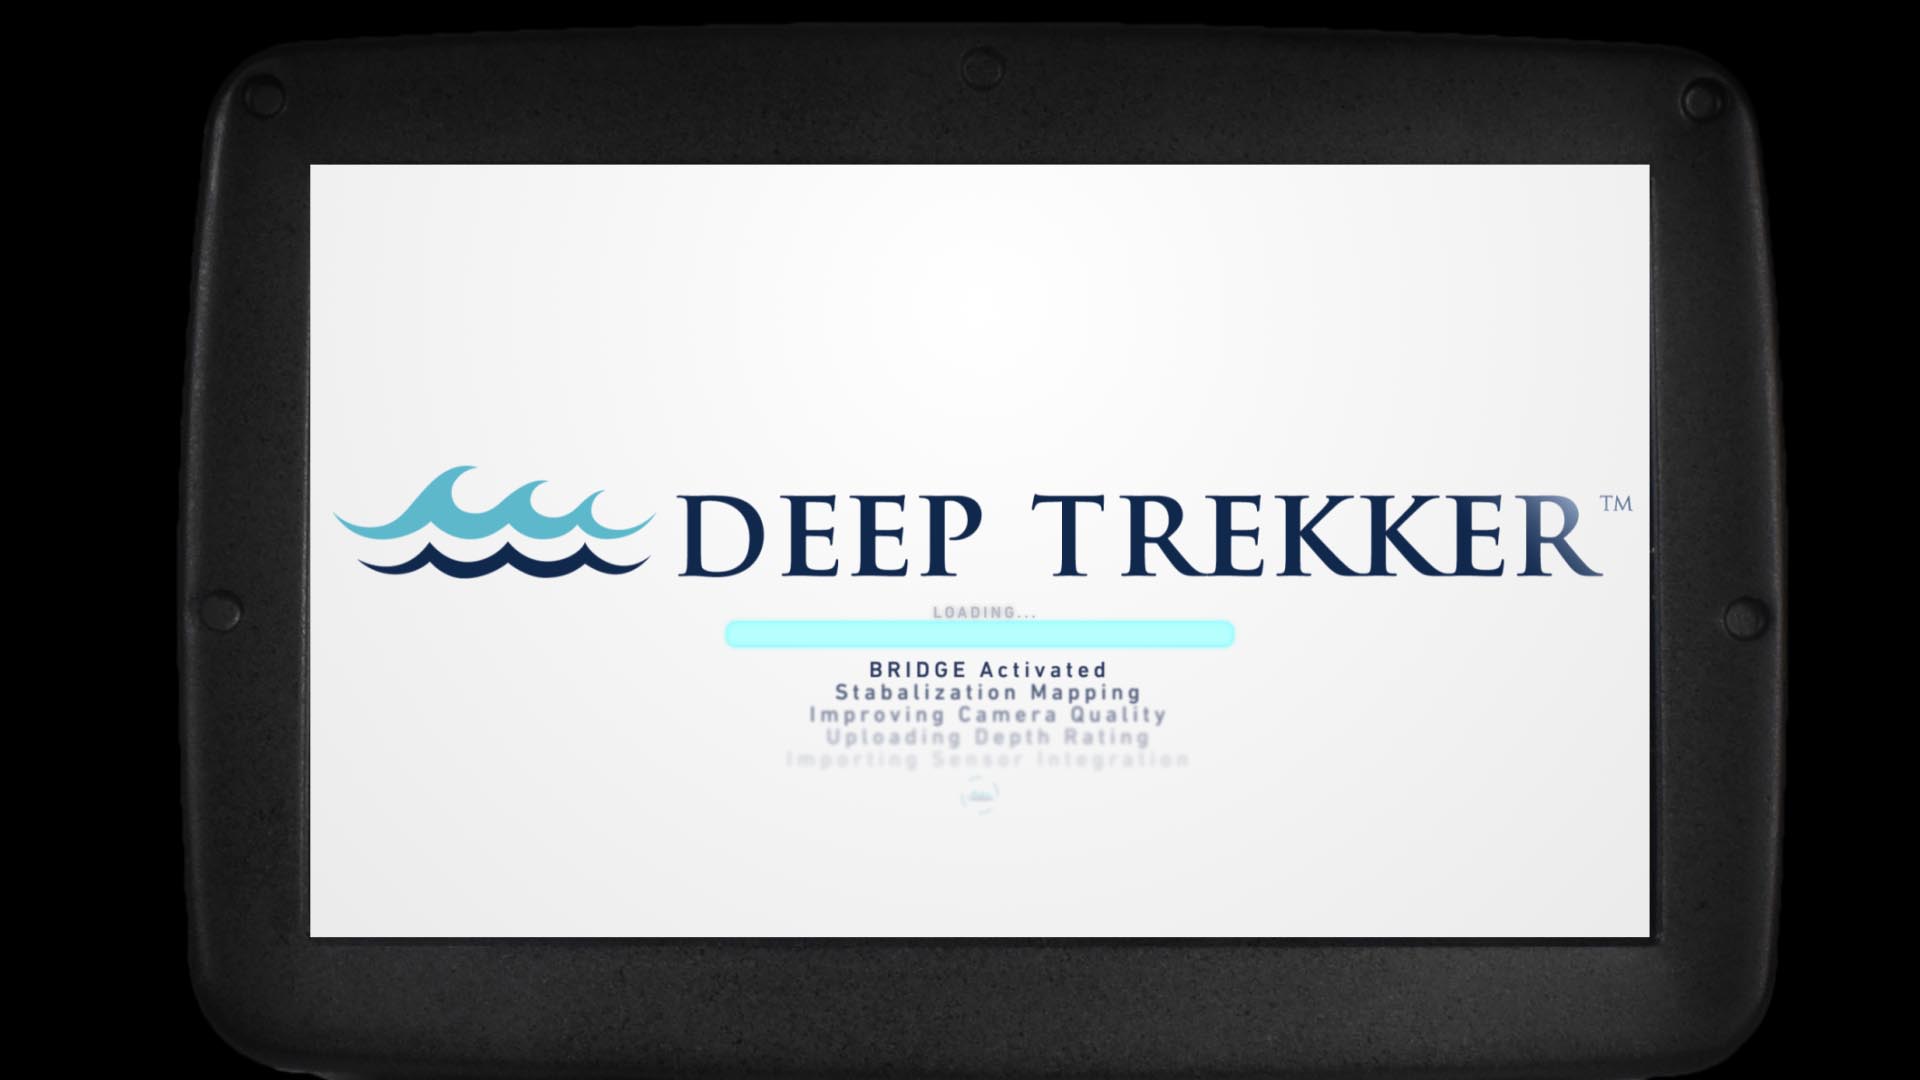 An all-new Deep Trekker ROV delivers dramatic power and capability